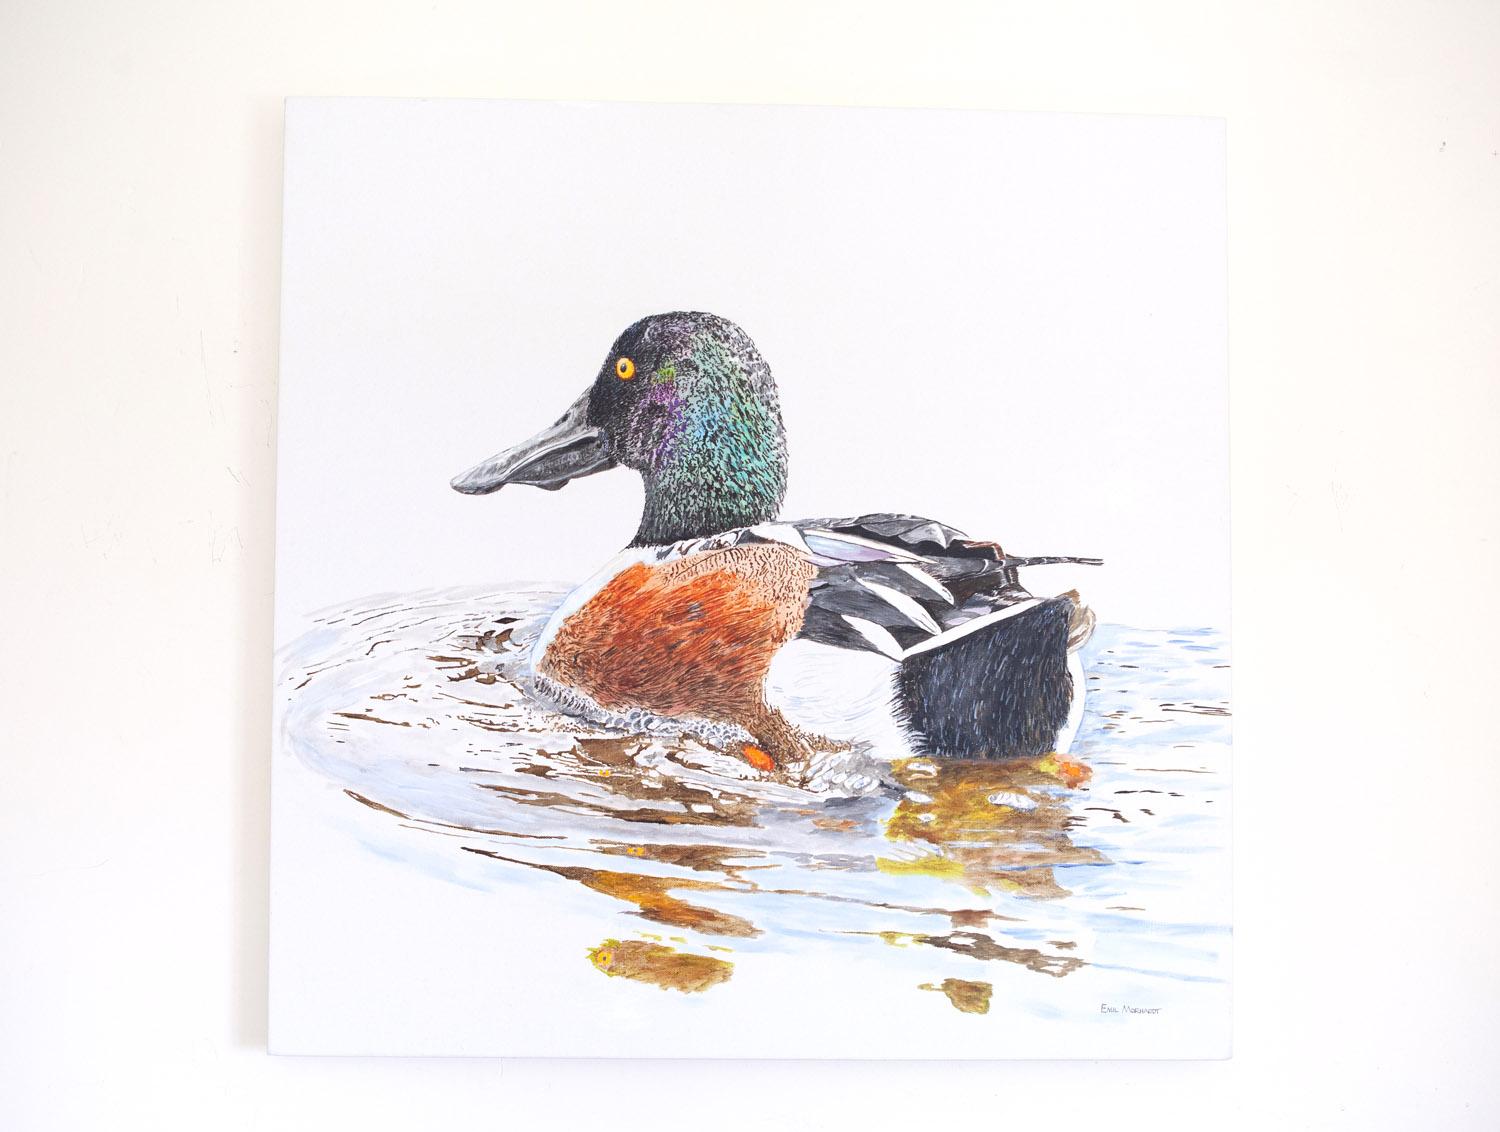 <p>Artist Comments<br />Sometimes these handsome ducks, who feed at the Santa Barbara Bird Refuge by plowing through the water with their bills open, take a break from shoveling and rotate in a circle to check things out, churning up the water